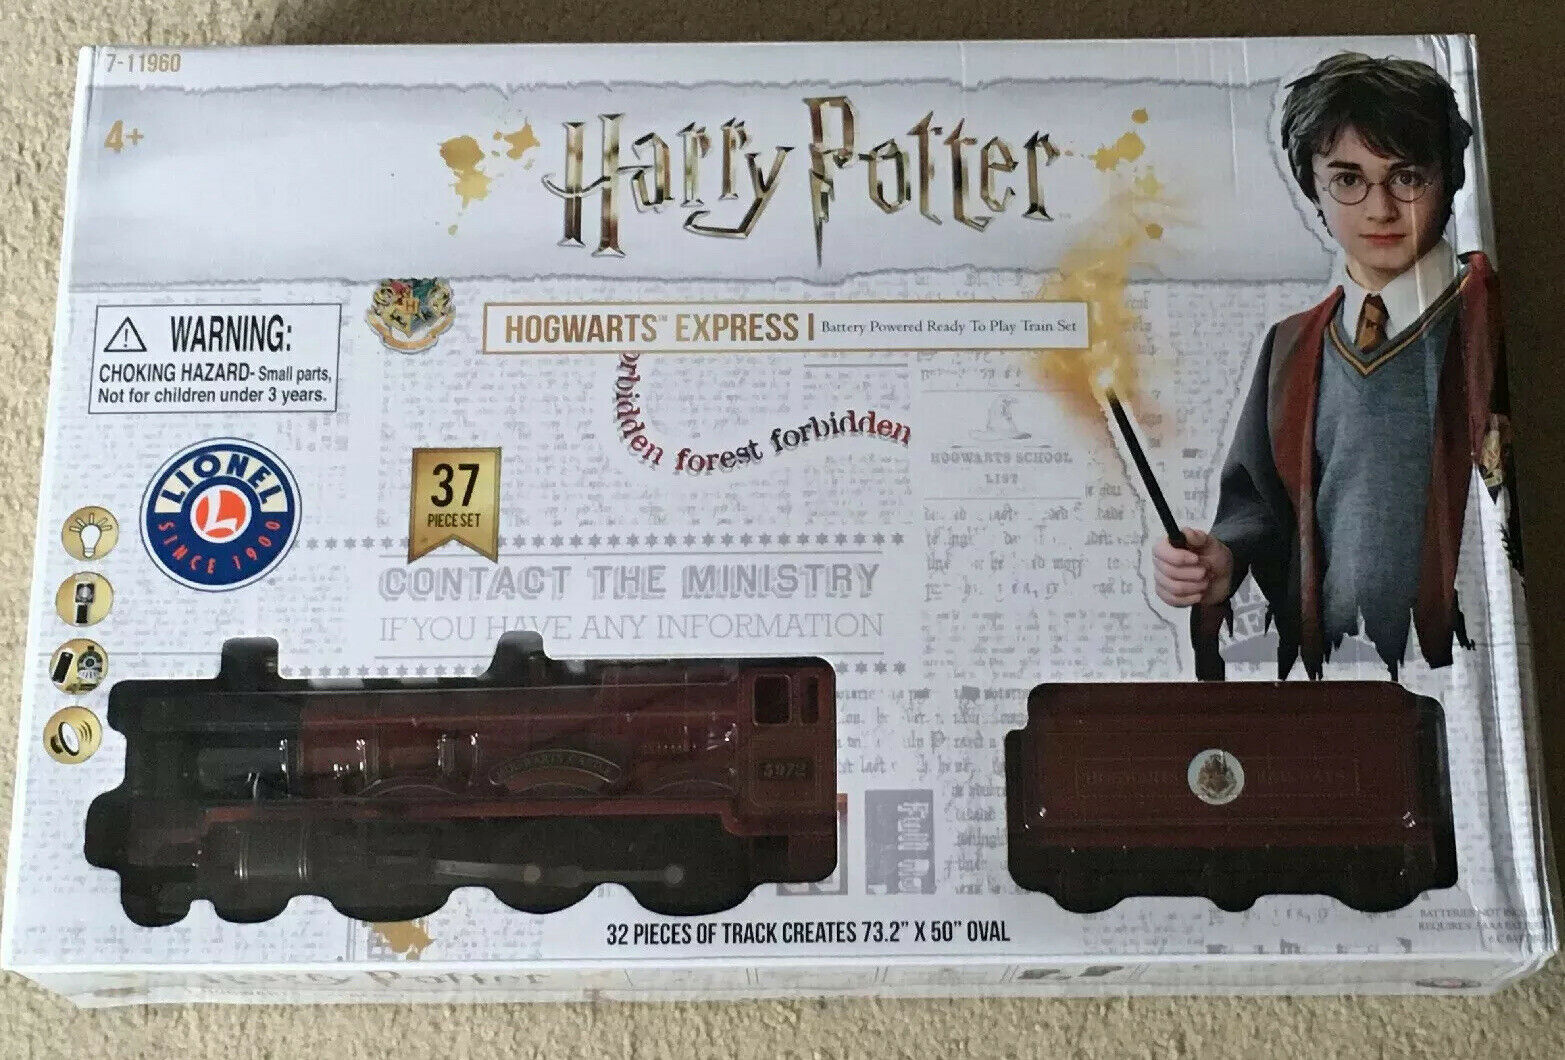 Lionel ~ 7-11960 Hogwarts Express Ready To Play Set Harry Potter